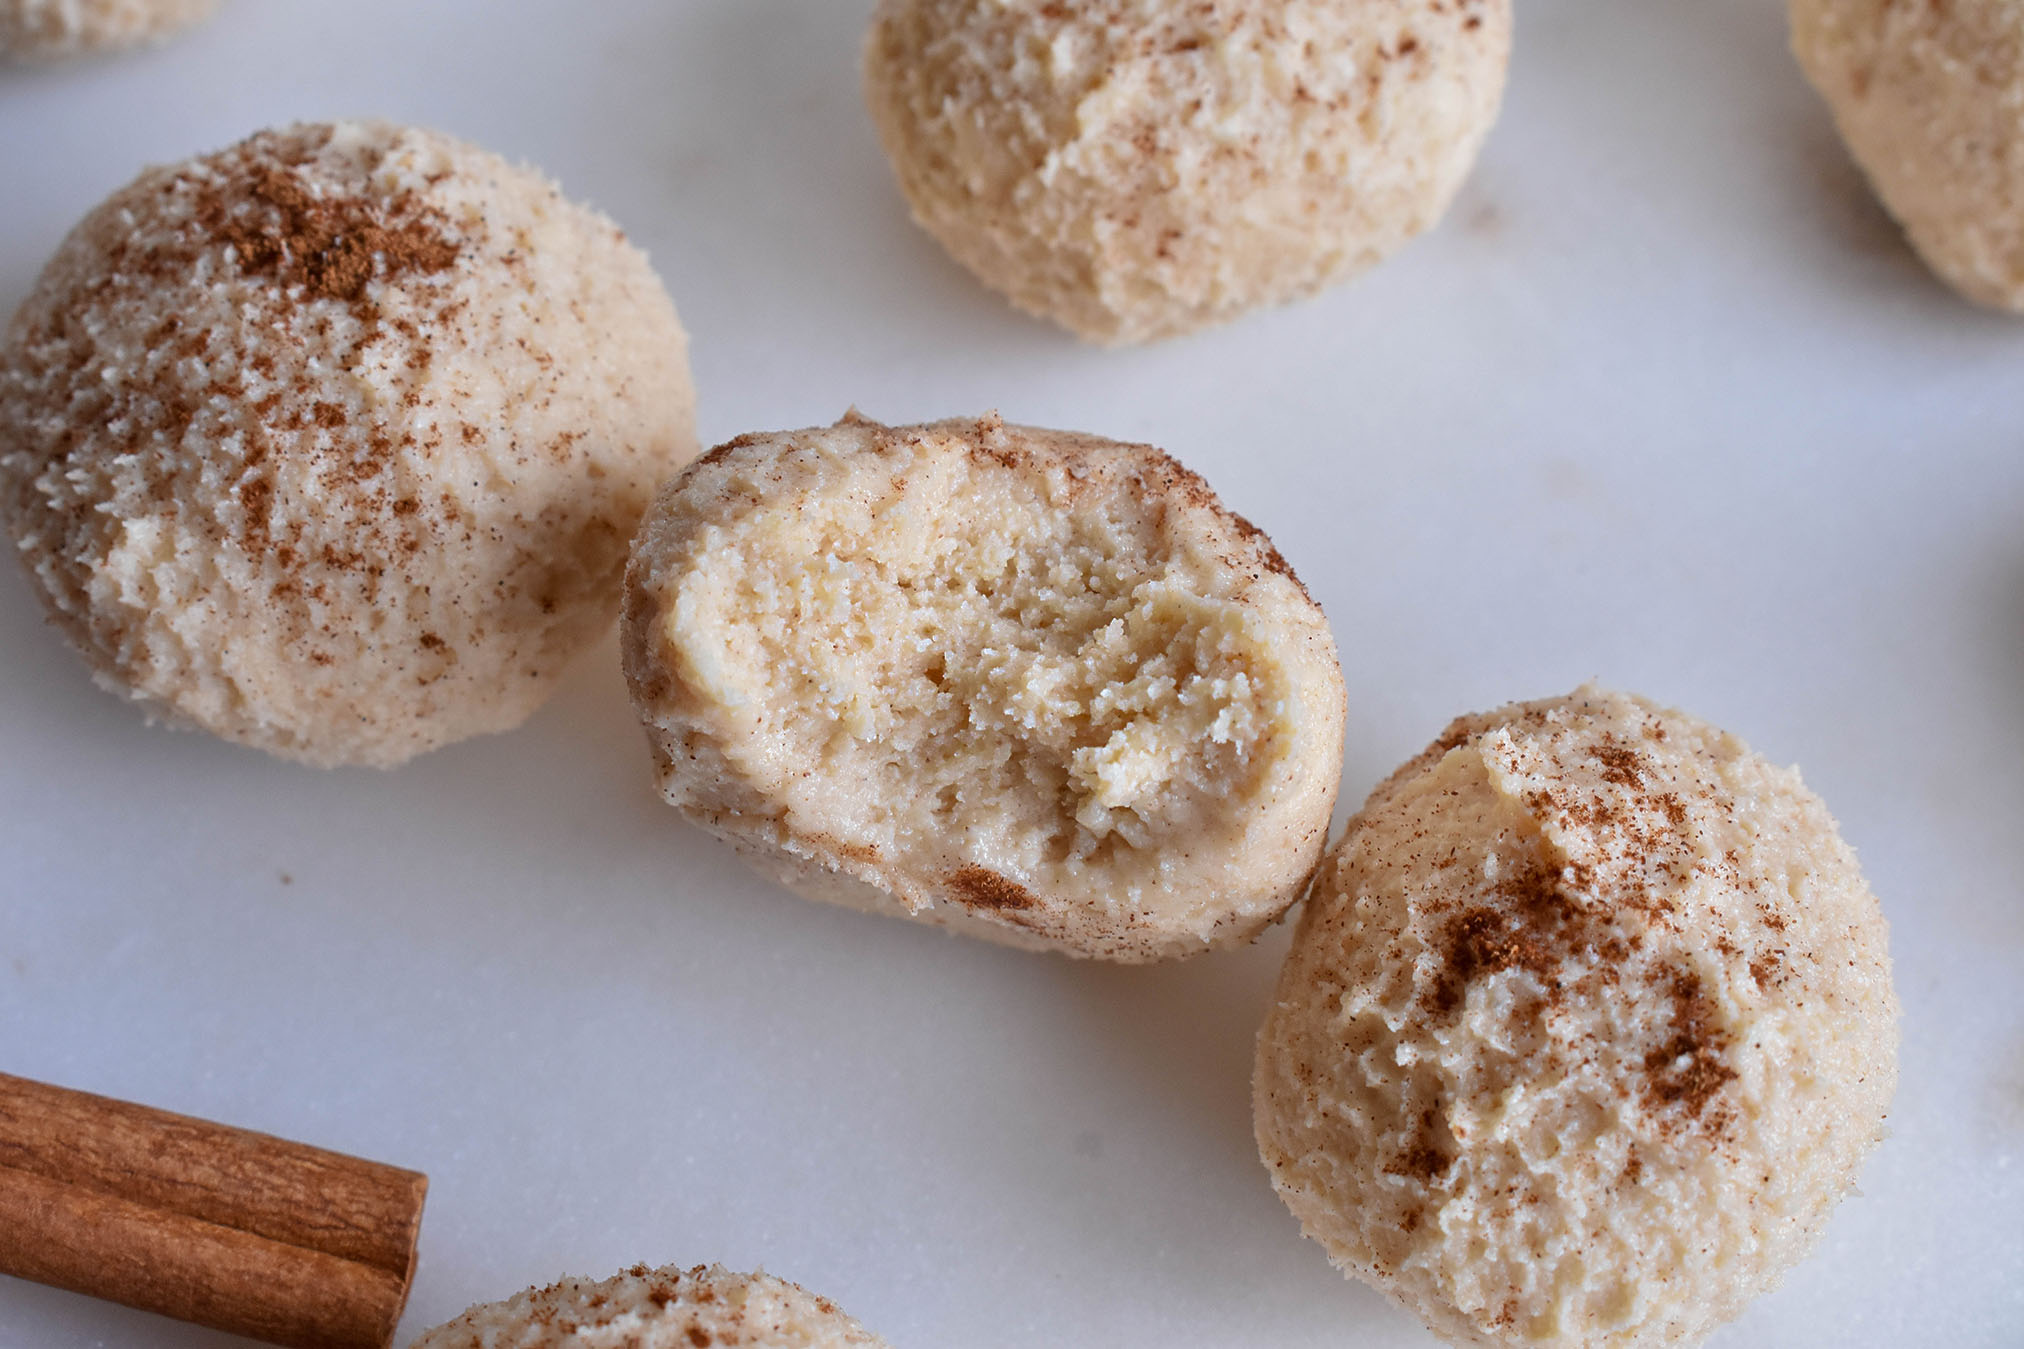 Light brown fat bombs in the shape of balls with cinnamon sprinkled on top on top of a white table top.